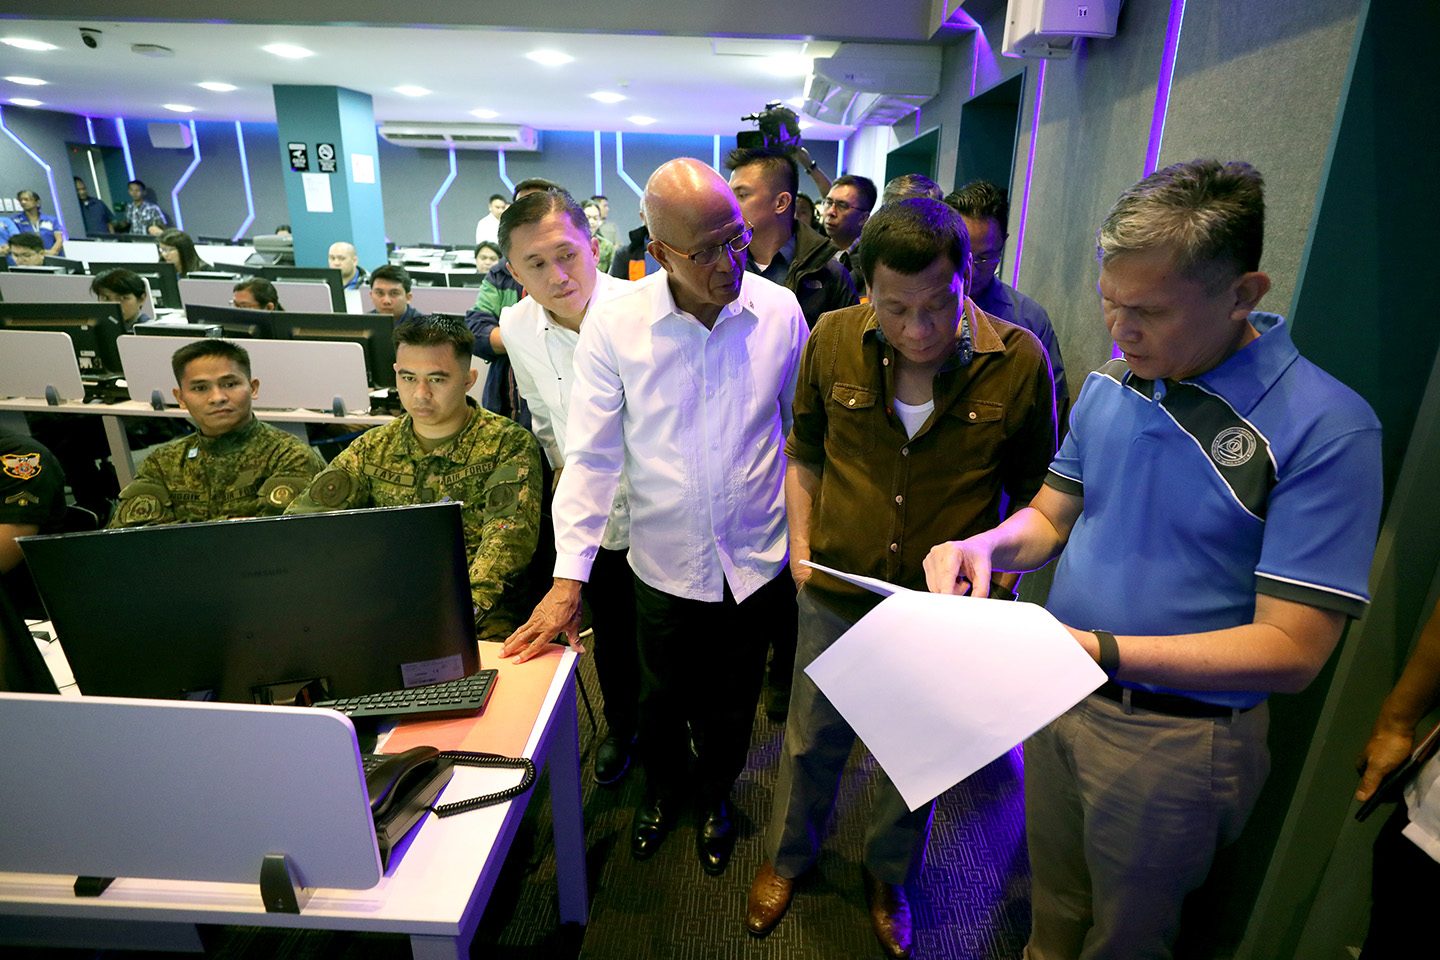 President Rodrigo Roa Duterte listens to the disaster preparedeness briefing of National Disaster Risk Reduction and Management Council (NDRRMC) Executive Director Ricardo Jalad inside the Operations Room of the NDRRMC Building in Camp Aguinaldo, Quezon City on September 13, 2018 as the country braces for the onslaught of Typhoon 'Ompong.' Joining the President are Secretary Christopher Lawrence 'Bong' Go of the Office of the Special Assistant to the President and Defense Secretary Delfin Lorenzana. ROBINSON NIÃAL JR./PRESIDENTIAL PHOTO
 